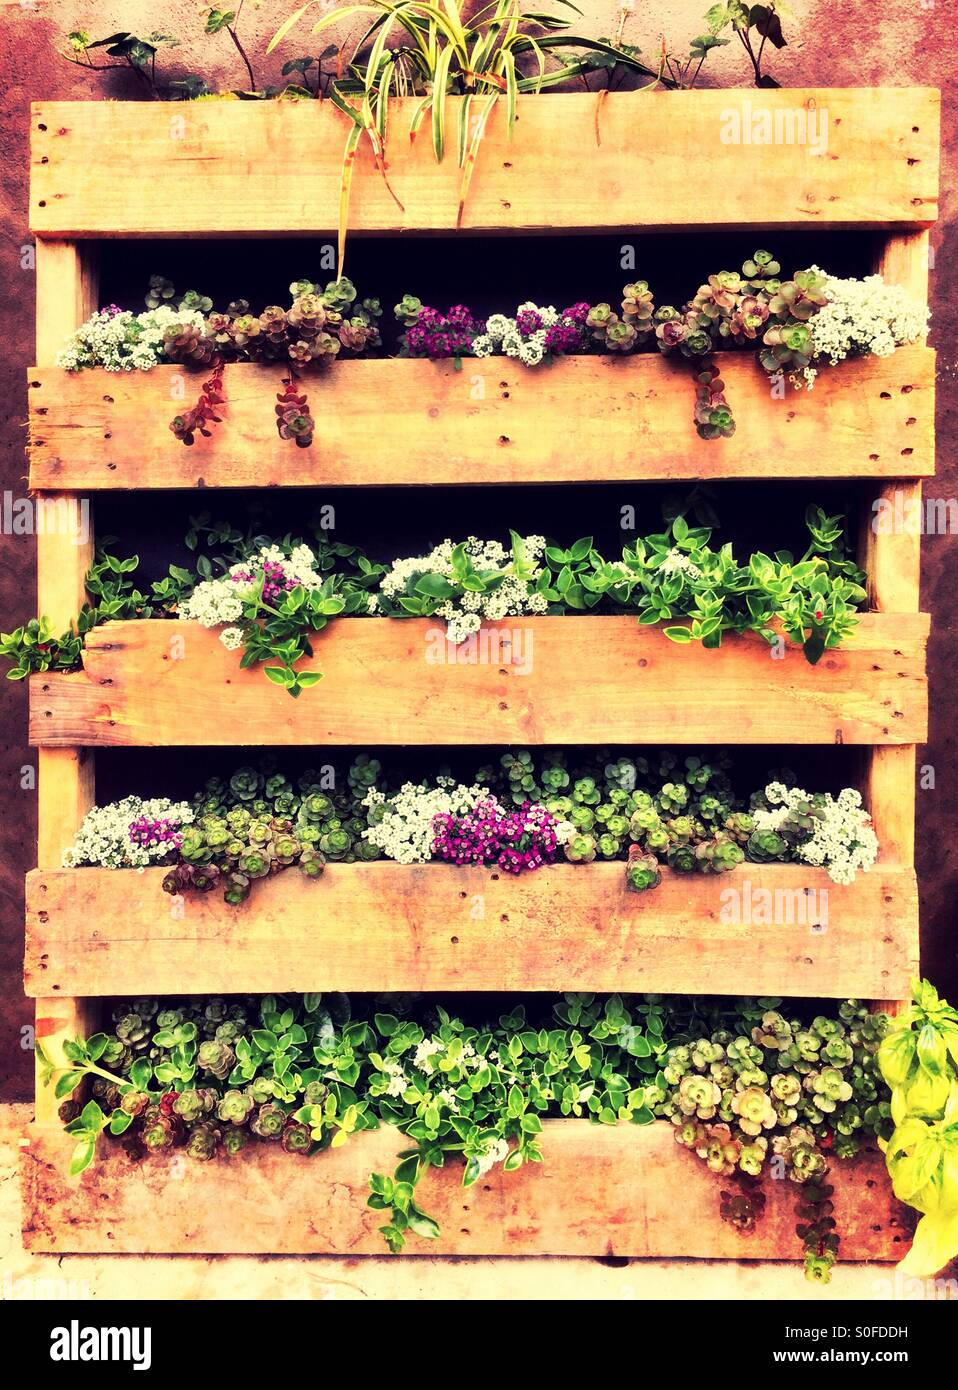 Vertical herb and native plant garden planted in an upright wooden pallet. Stock Photo